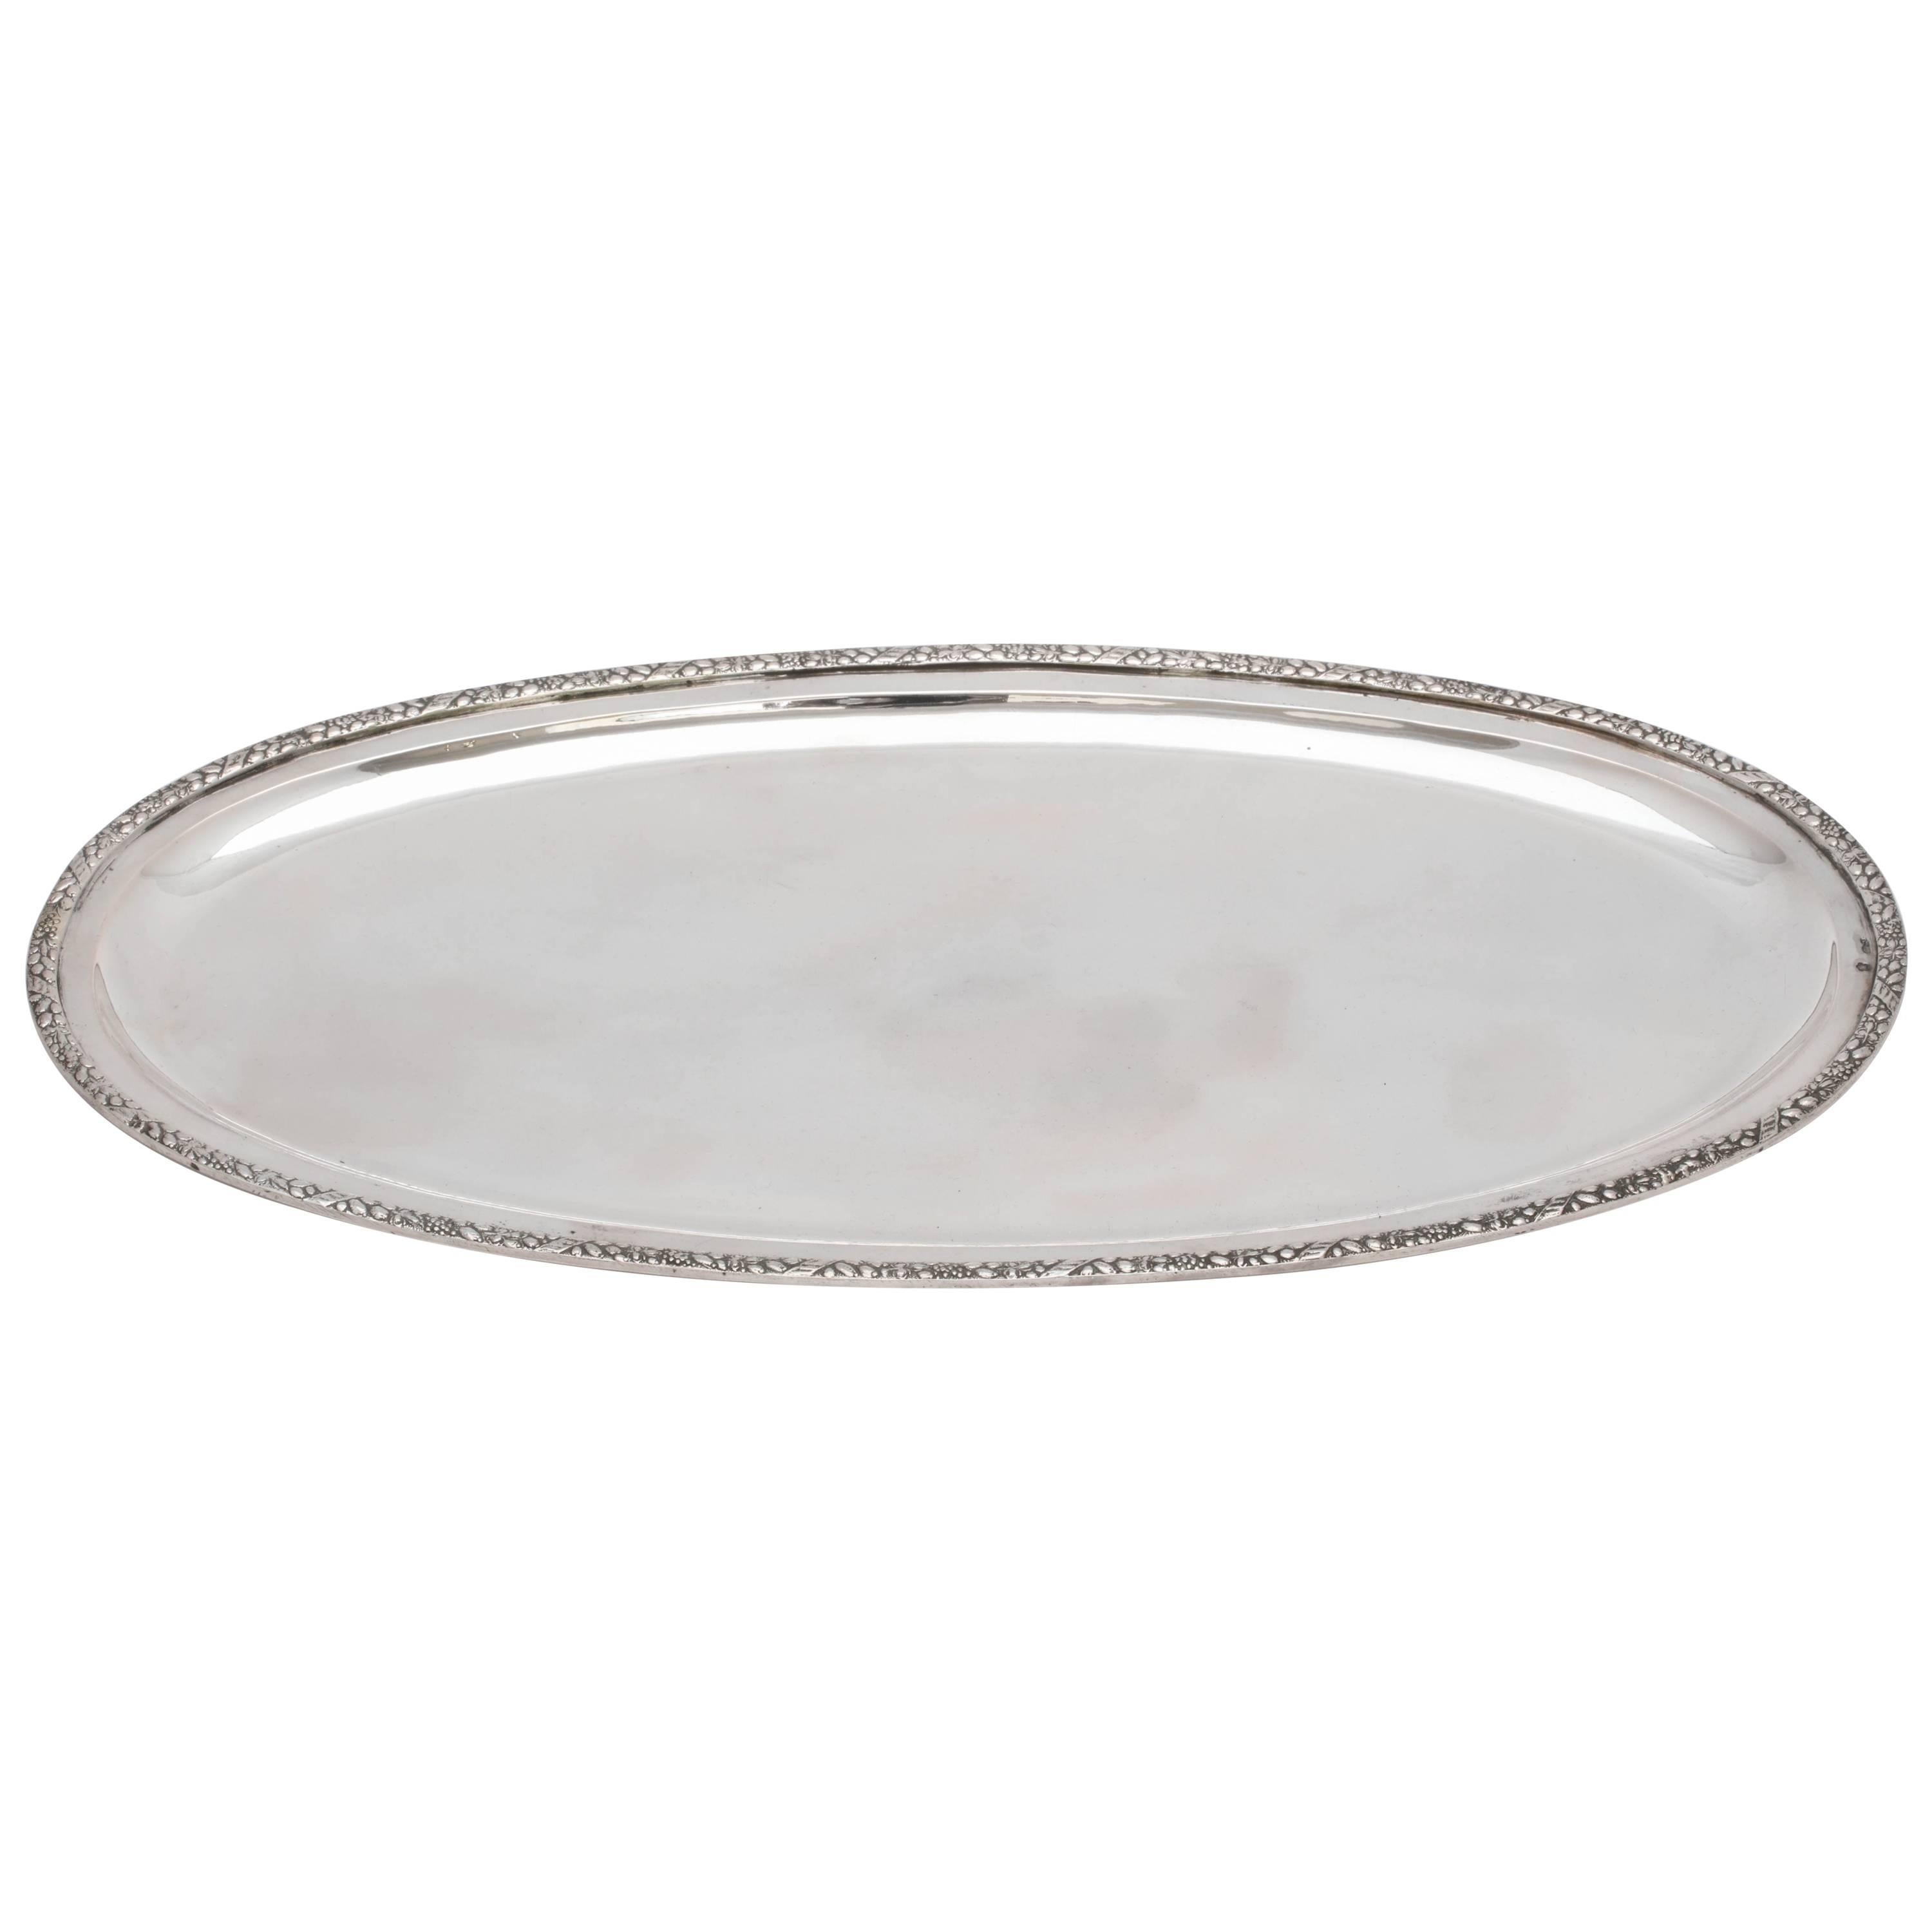 Austrian Continental Silver '.835' Oval Serving or Table Platter